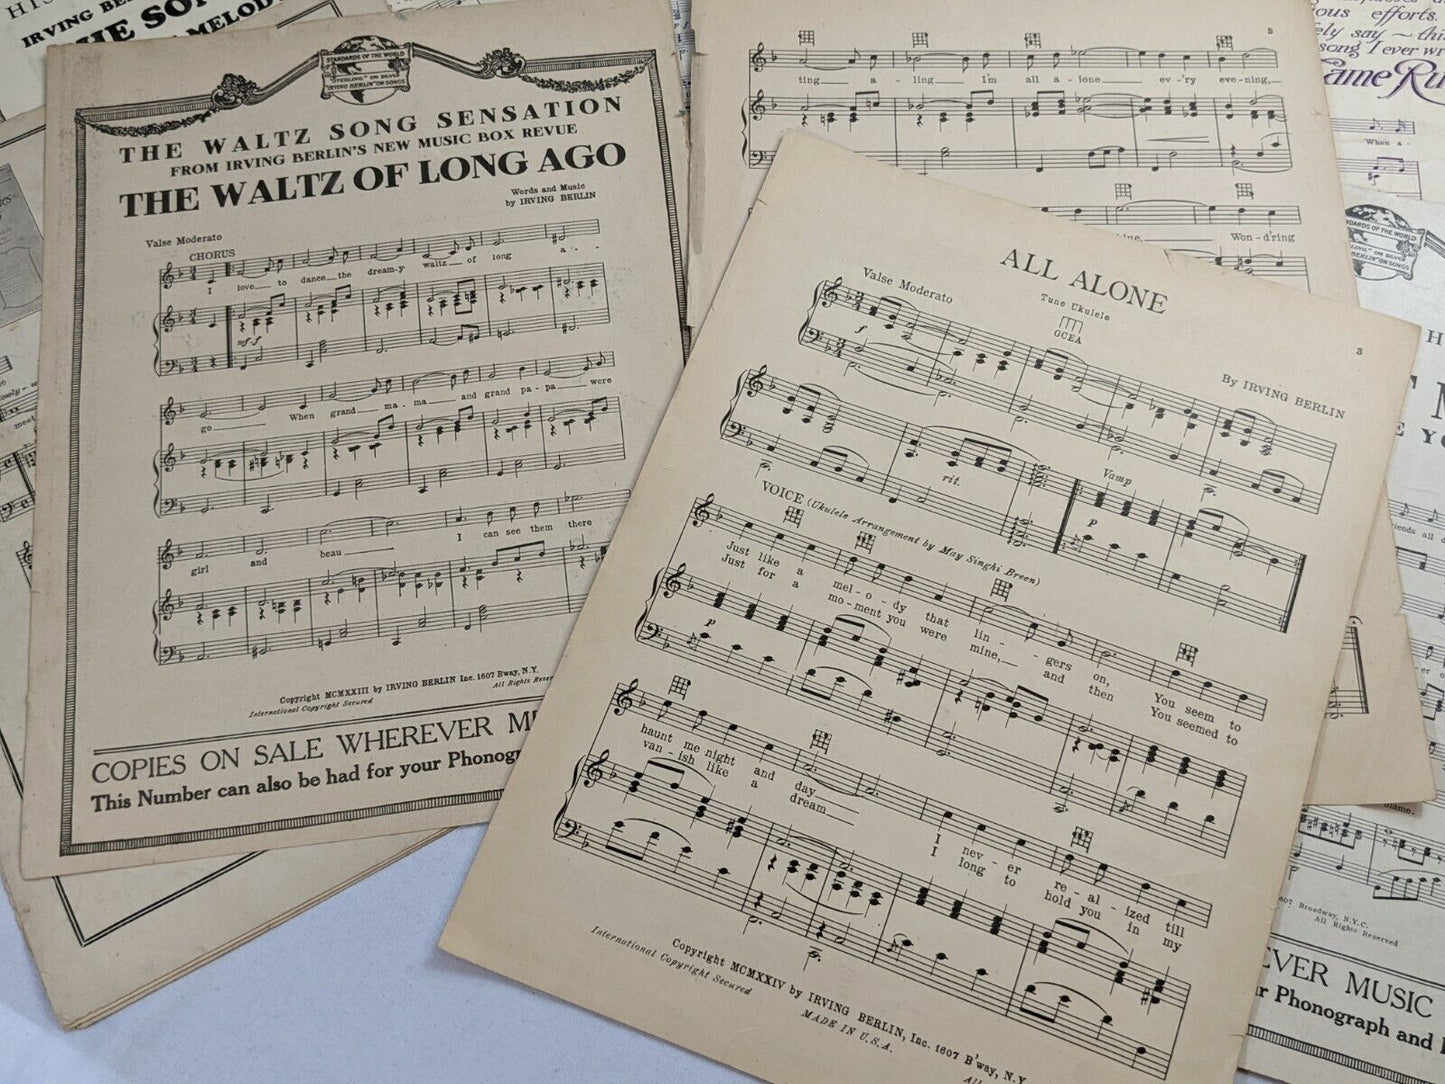 Lot of 6 Vintage Music Sheet Collection by Irving Berlin